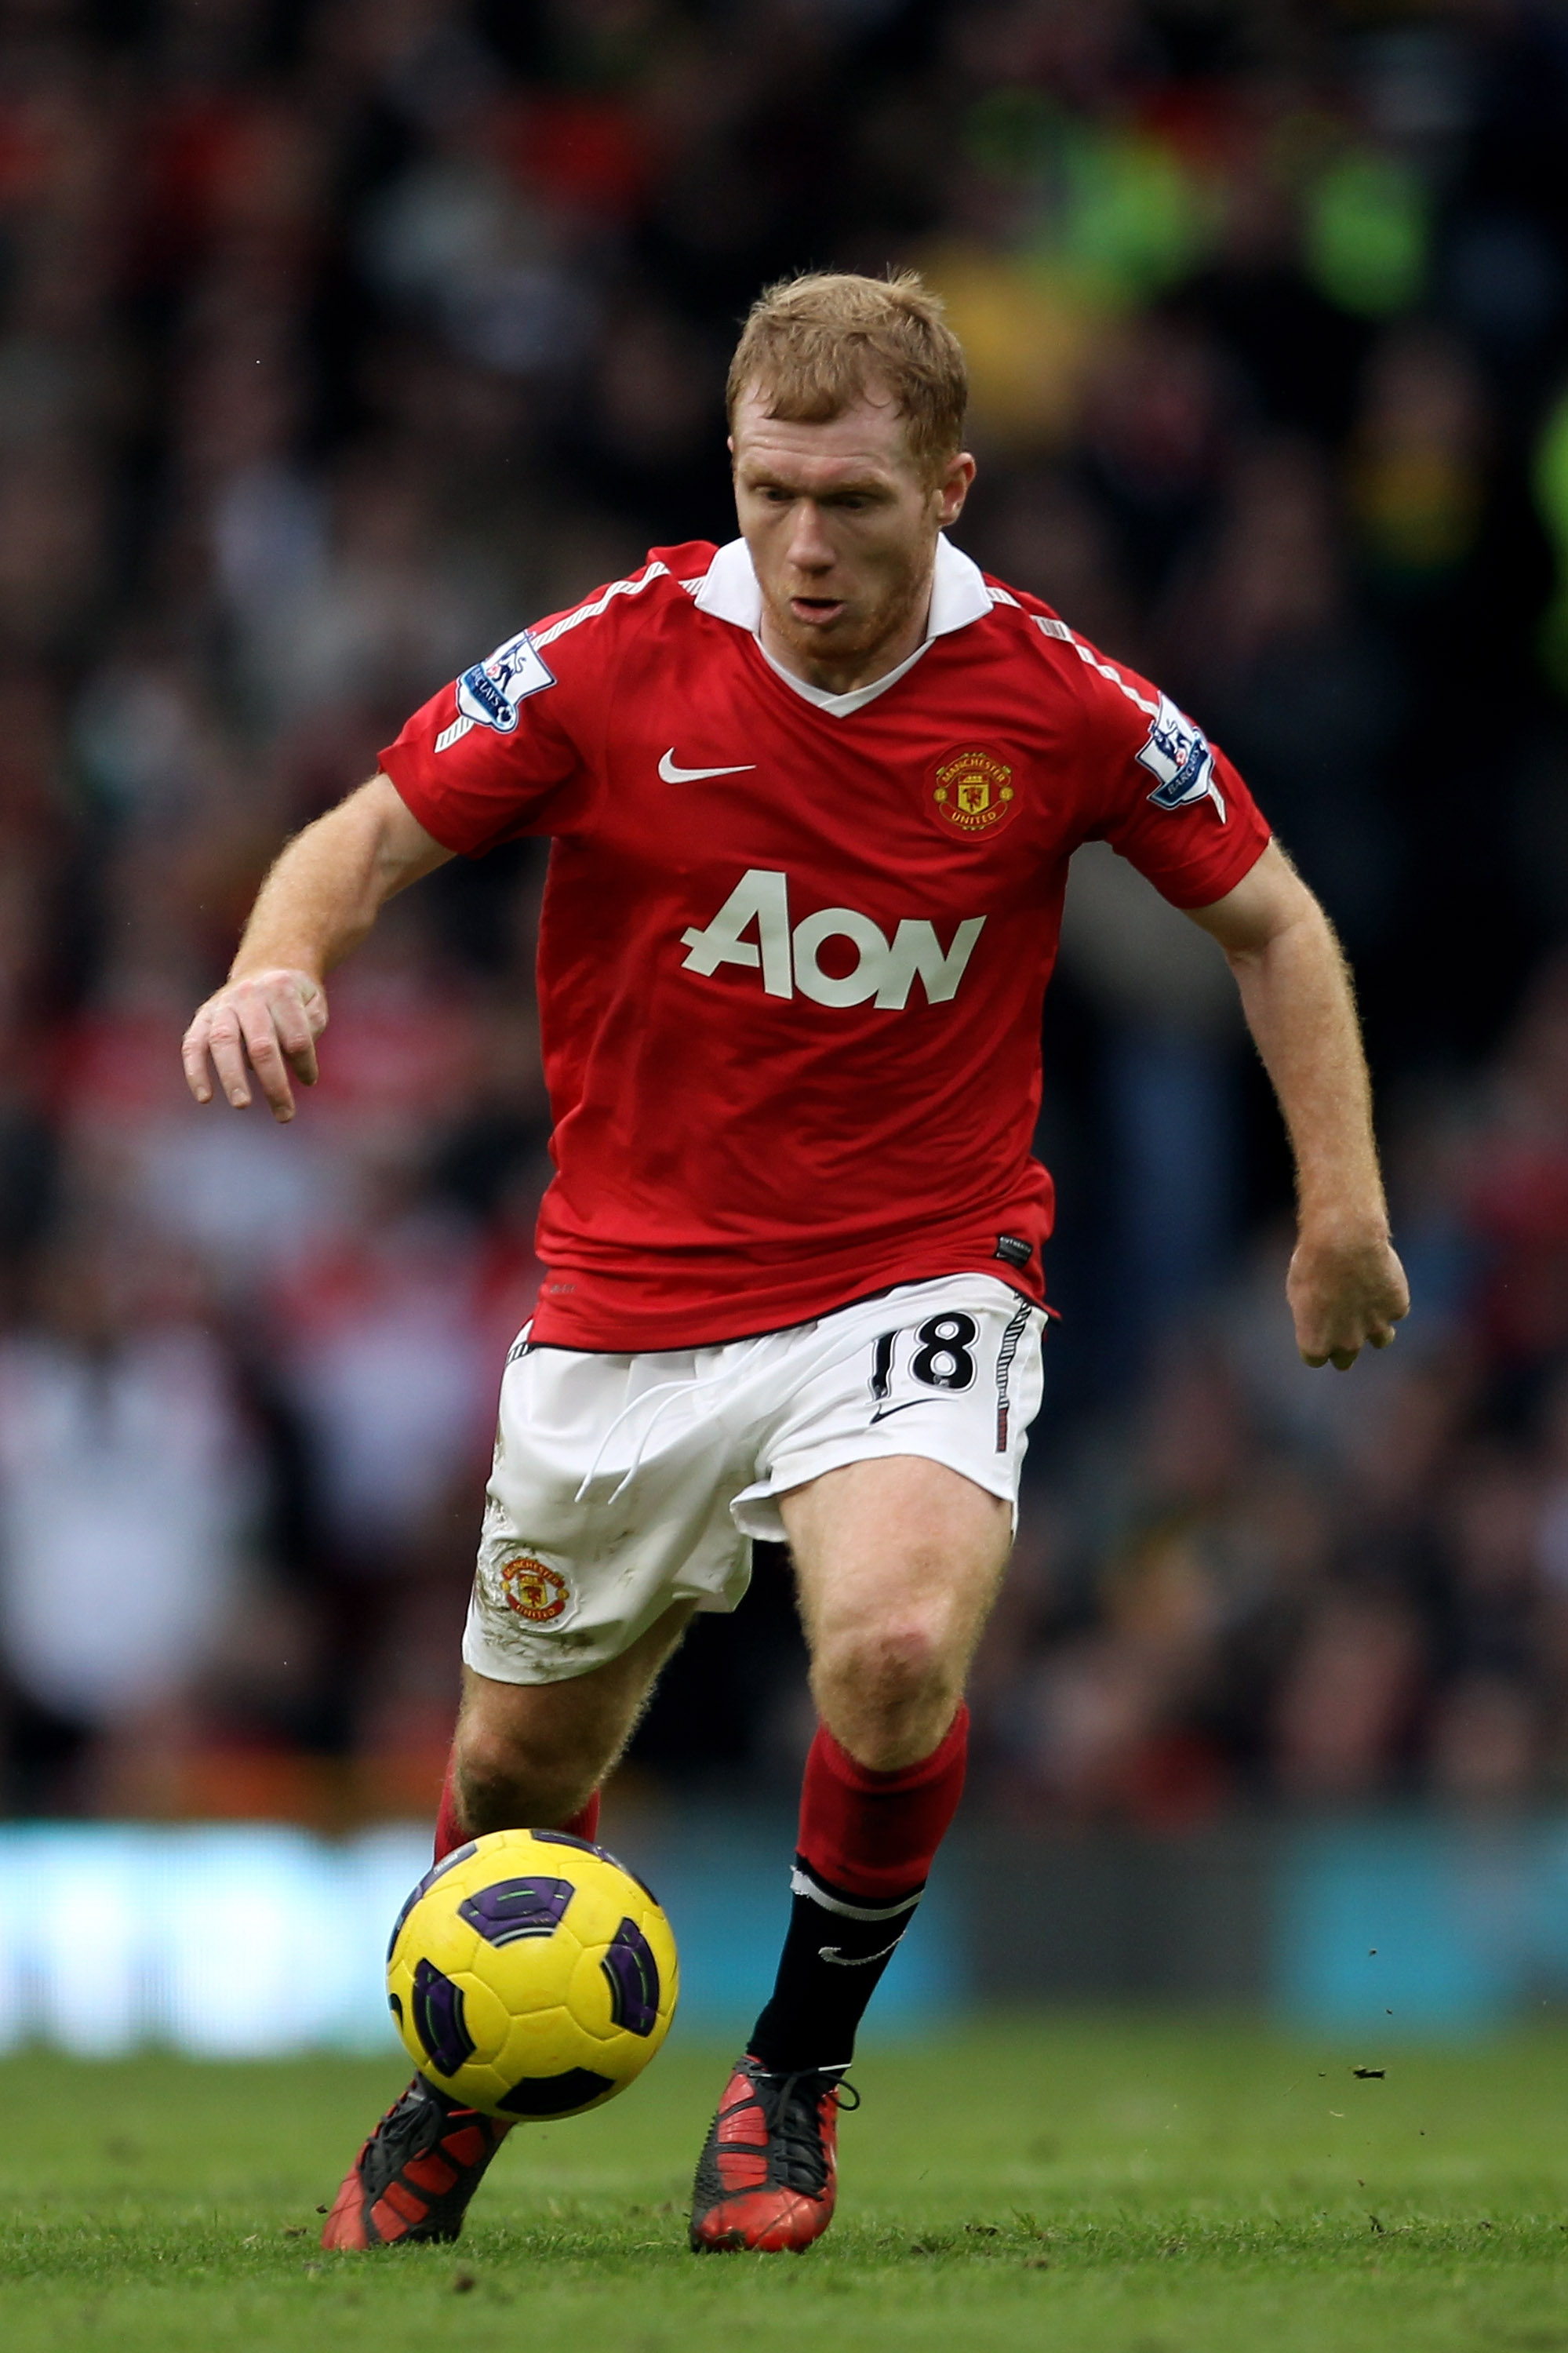 MANCHESTER, ENGLAND - FEBRUARY 12:  Paul Scholes of Manchester United in action during the Barclays Premier League match between Manchester United and Manchester City at Old Trafford on February 12, 2011 in Manchester, England.  (Photo by Alex Livesey/Get